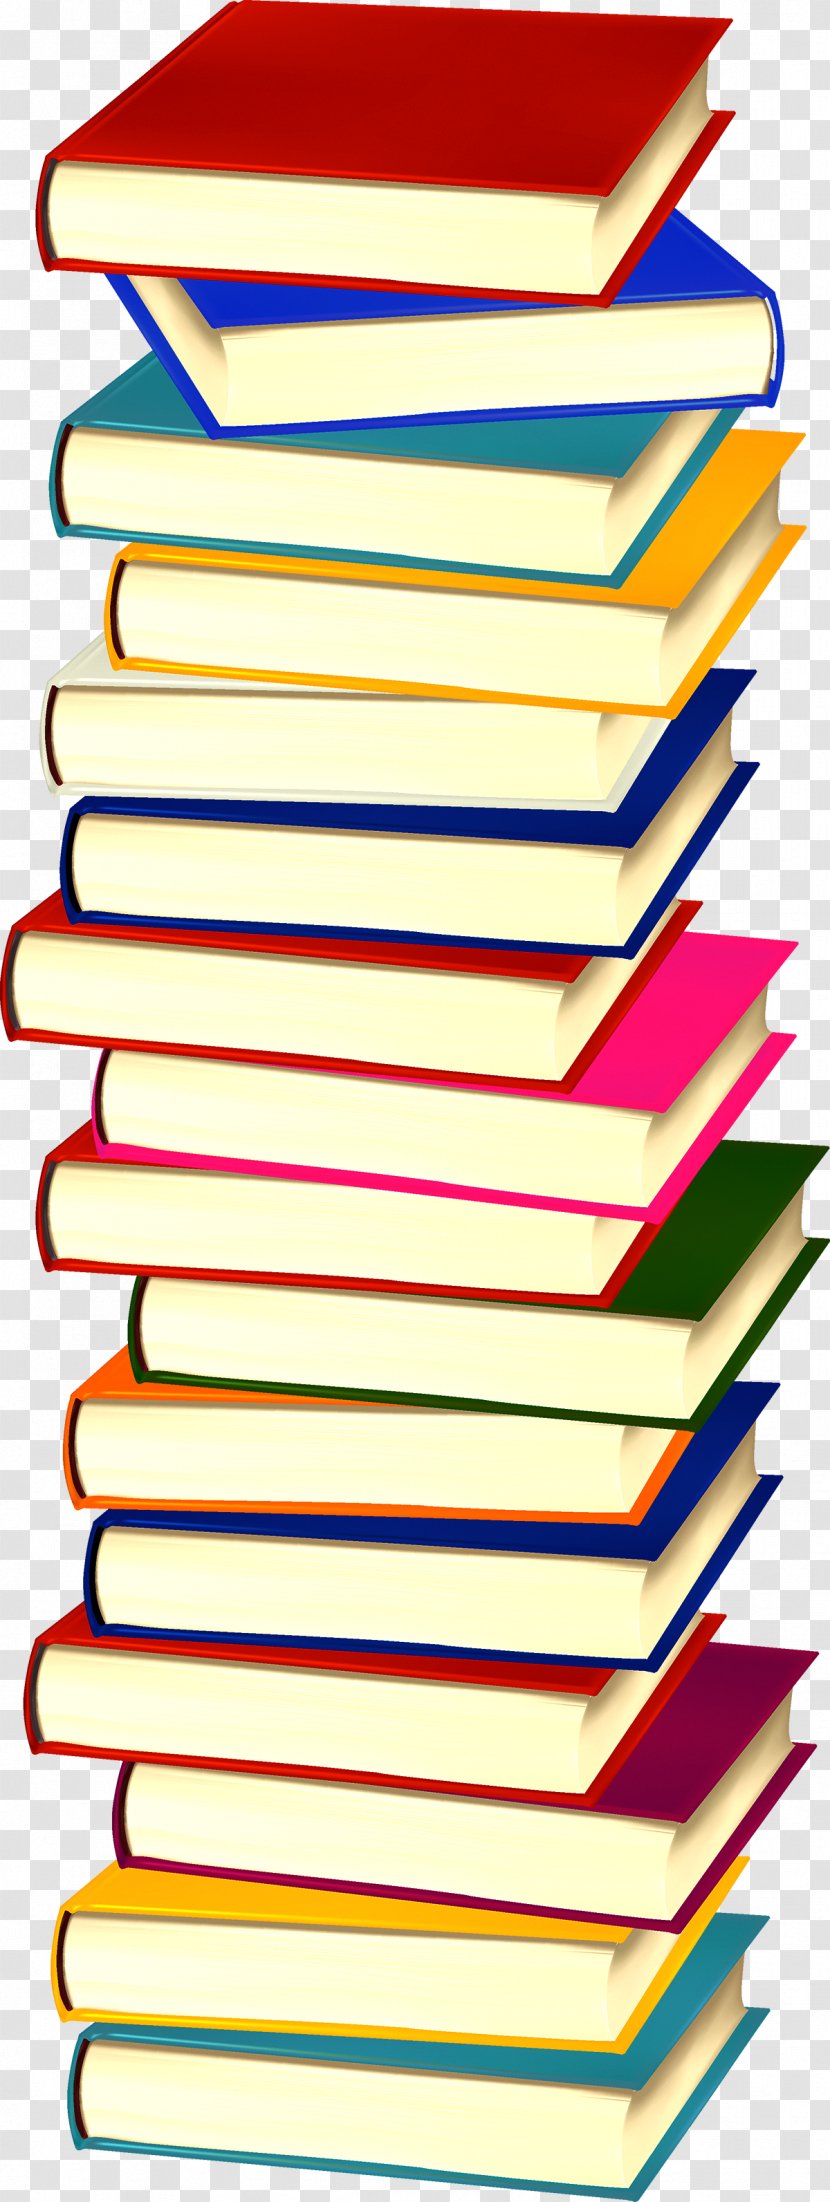 Book Colored Pencil - Area - Pile Of Books Transparent PNG